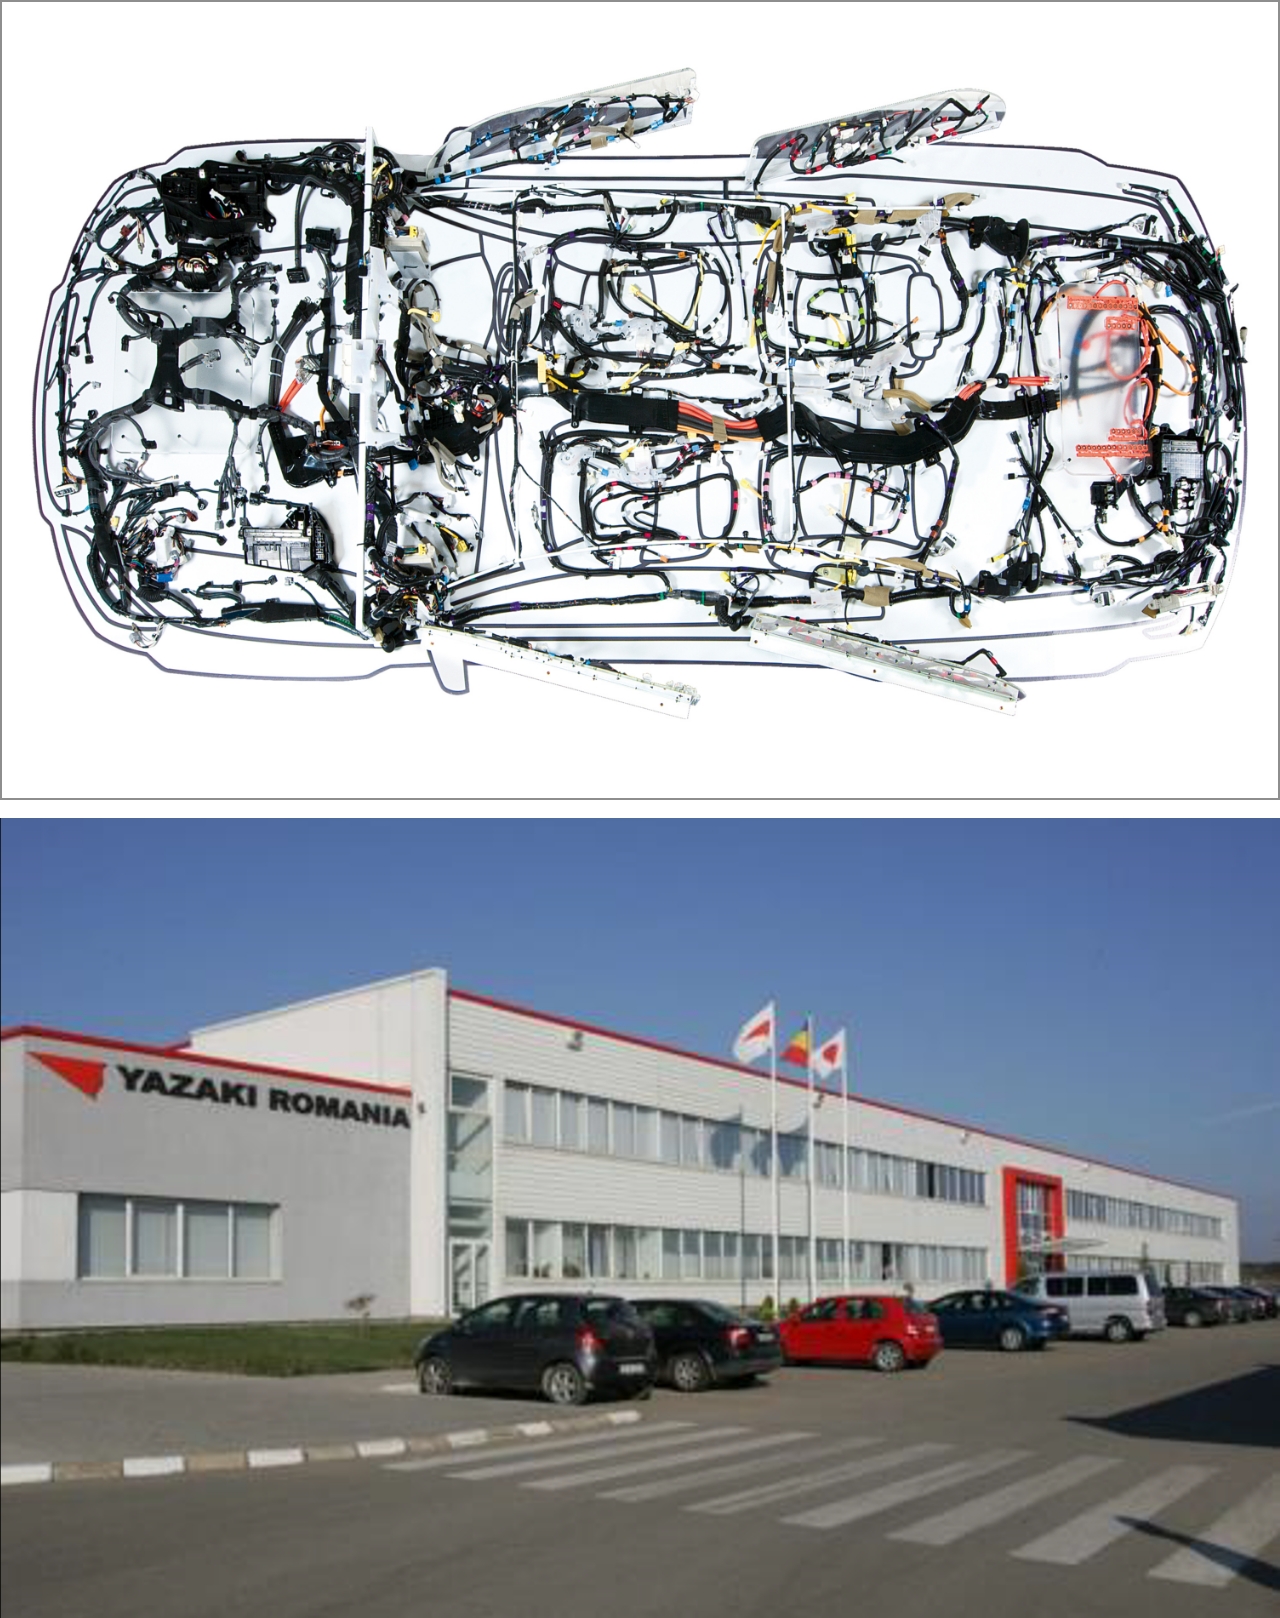 Photos of Top: An artist’s rendition of a wire harness (assembled wires for automotive) / Bottom: Factory in Romania